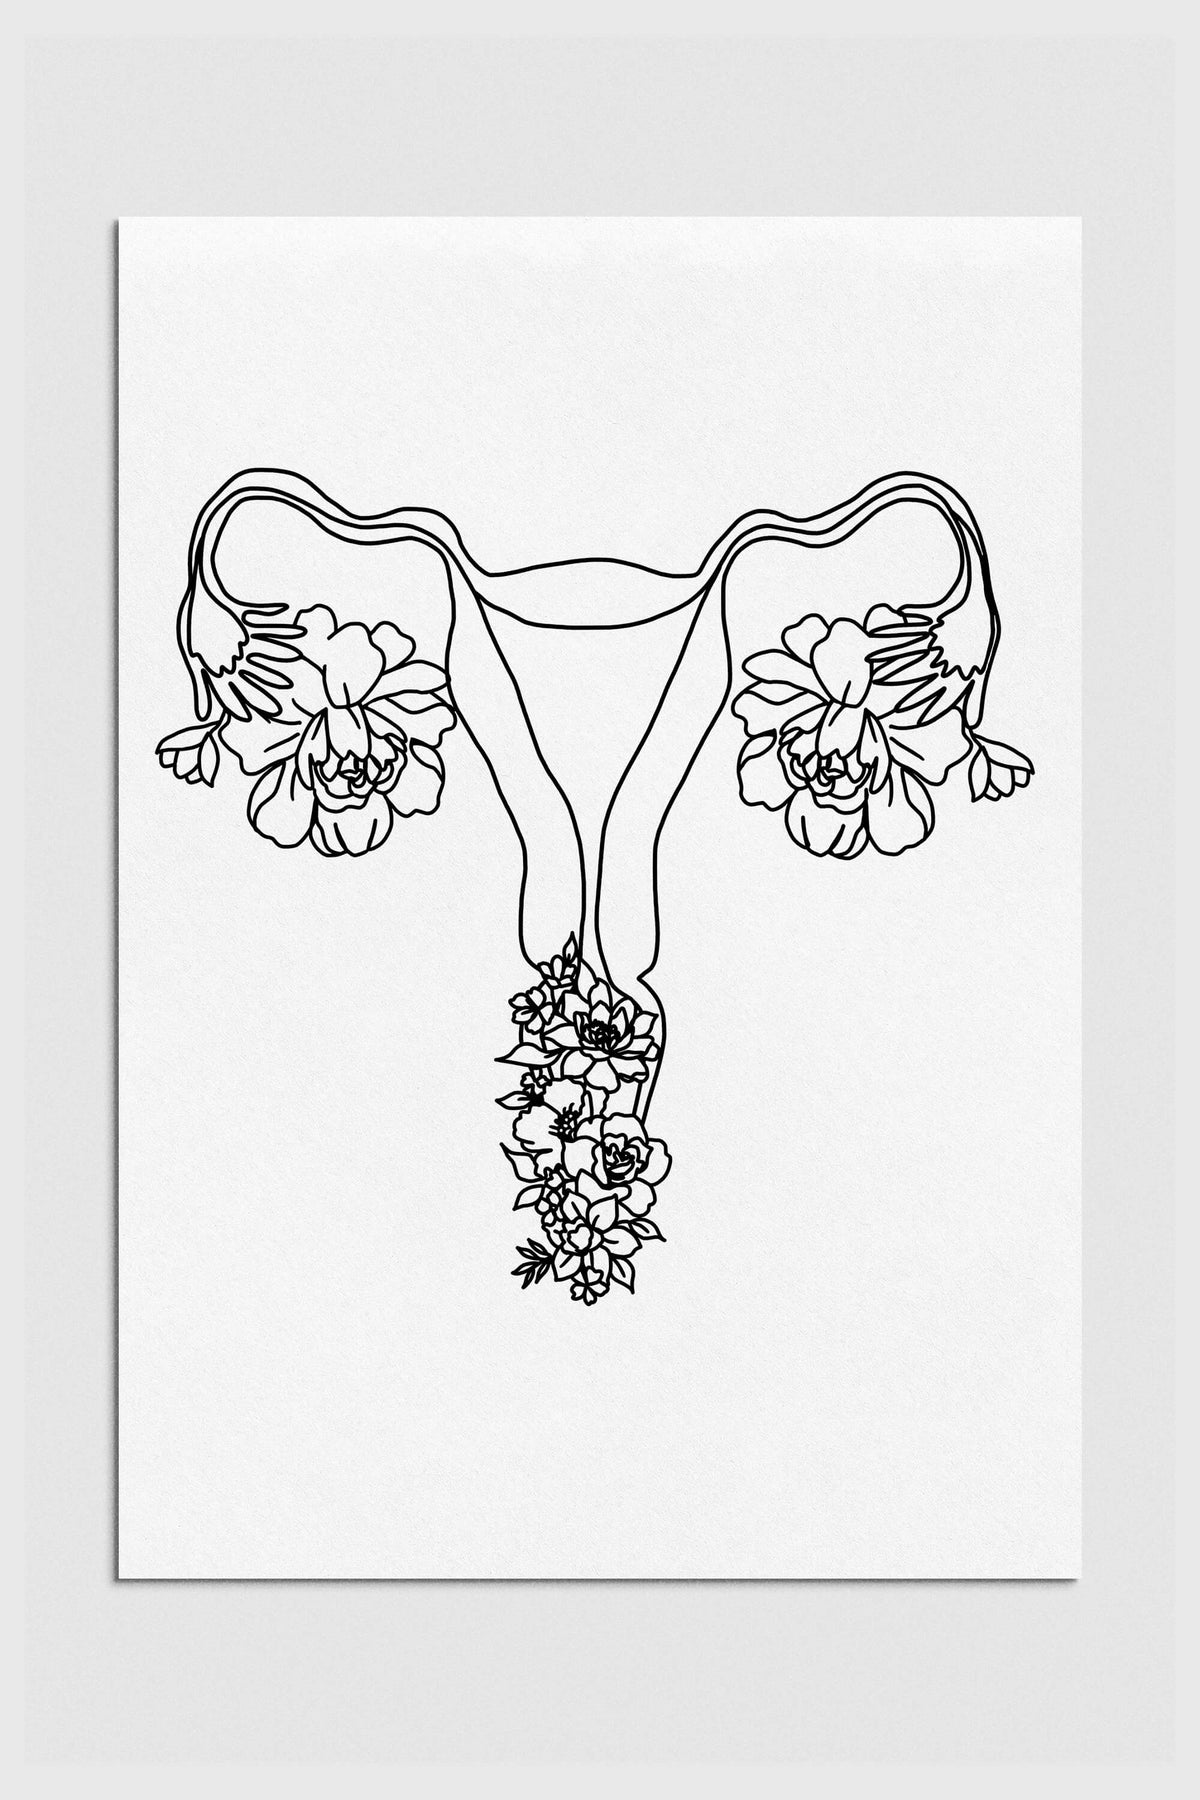 Floral Uterus Line Art in Black and White. A minimalist and empowering depiction of female anatomy, celebrating the beauty of life and femininity.